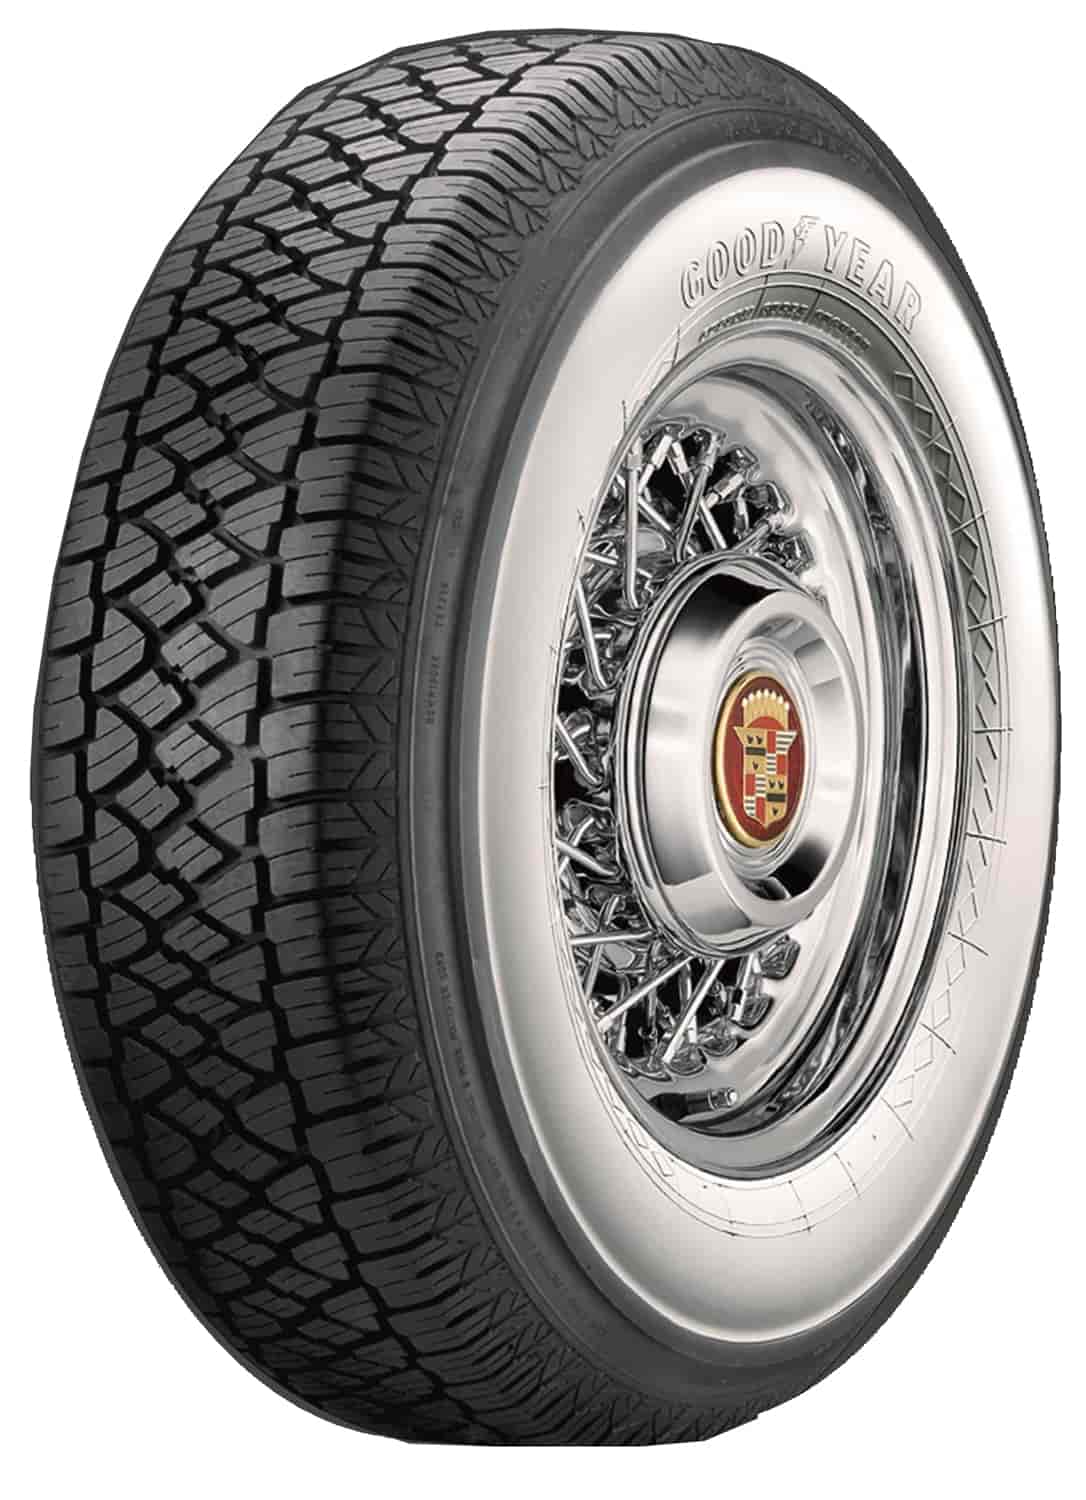 Goodyear Collector Series Classic Radials Tire